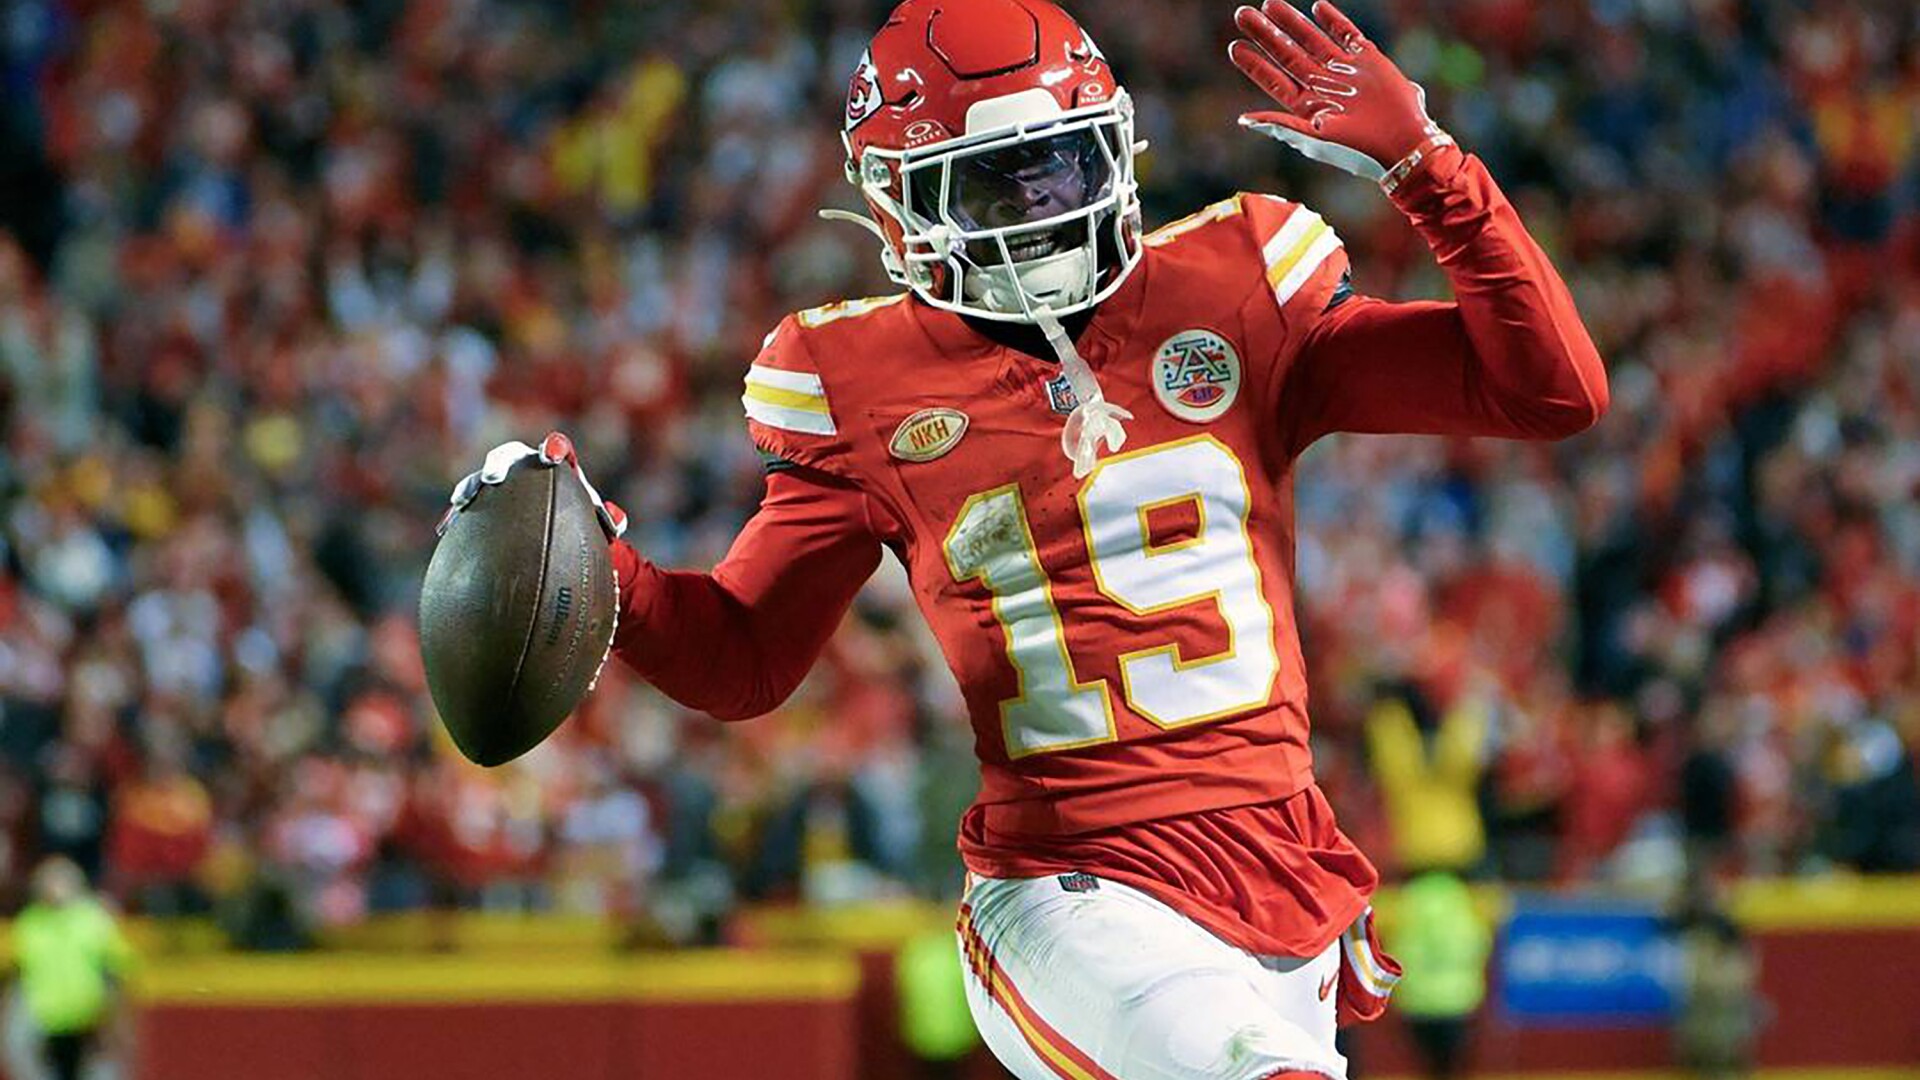 unable to send kadarius toney home with pay, the chiefs might have done the next closest thing